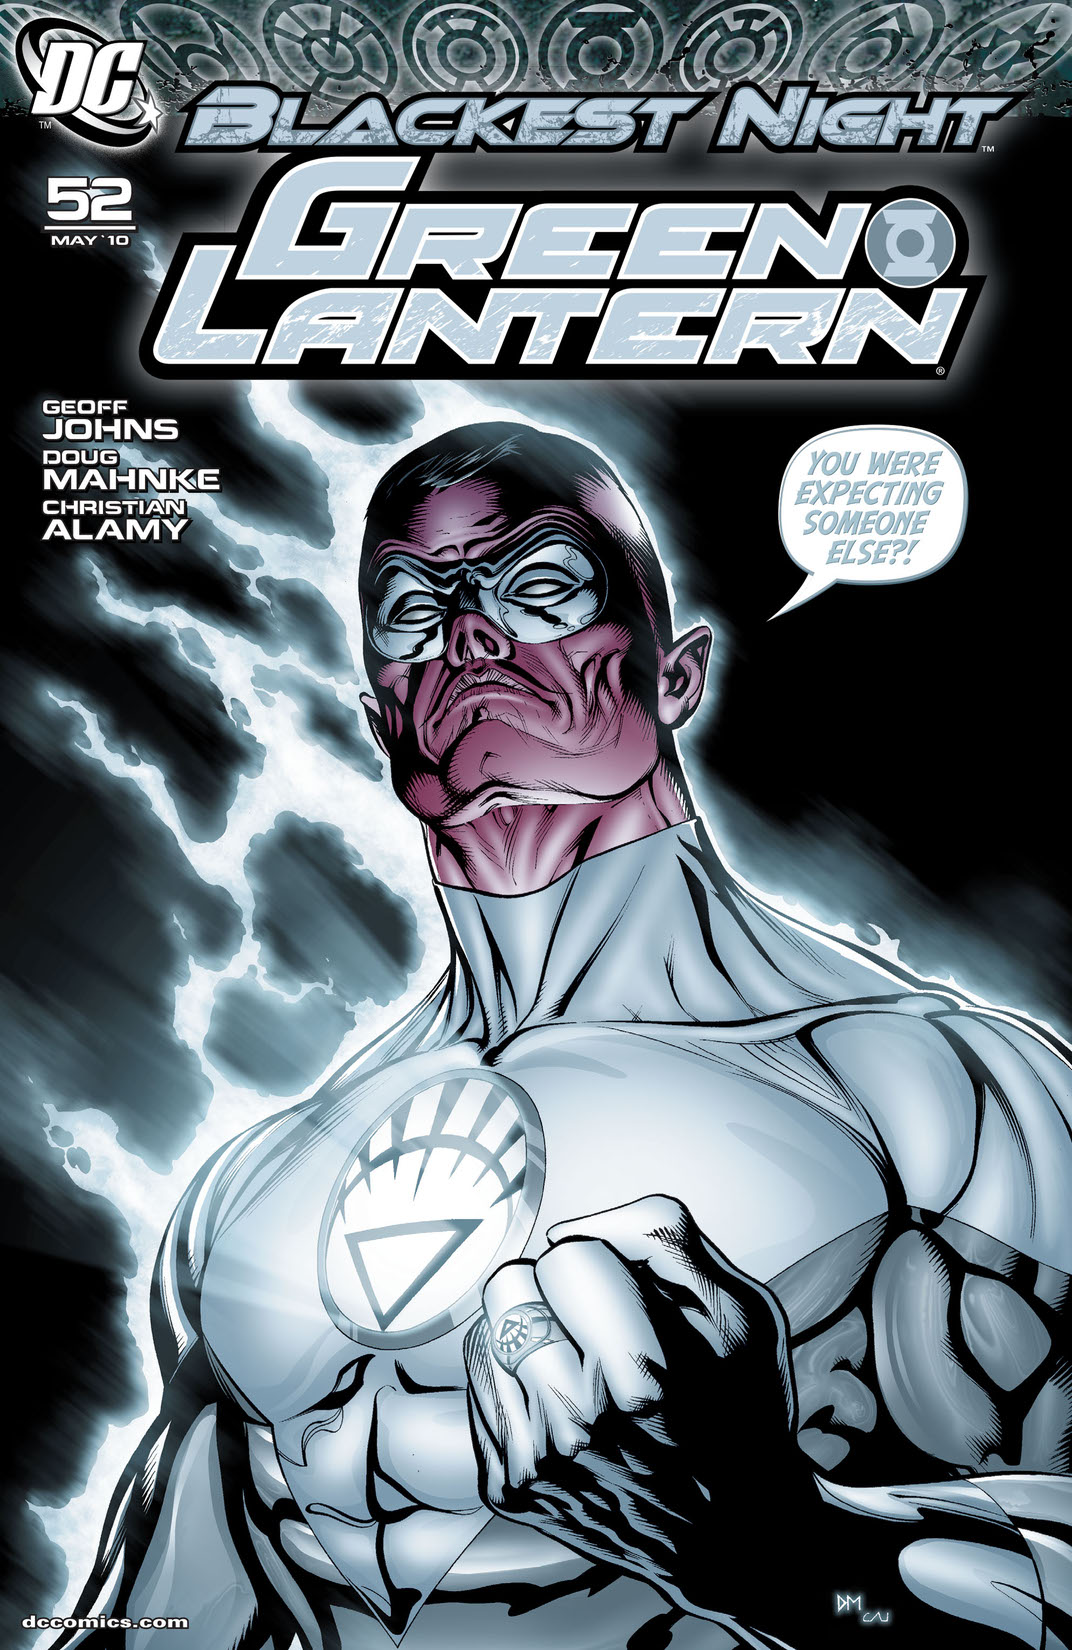 Green Lantern (2005-) #52 preview images